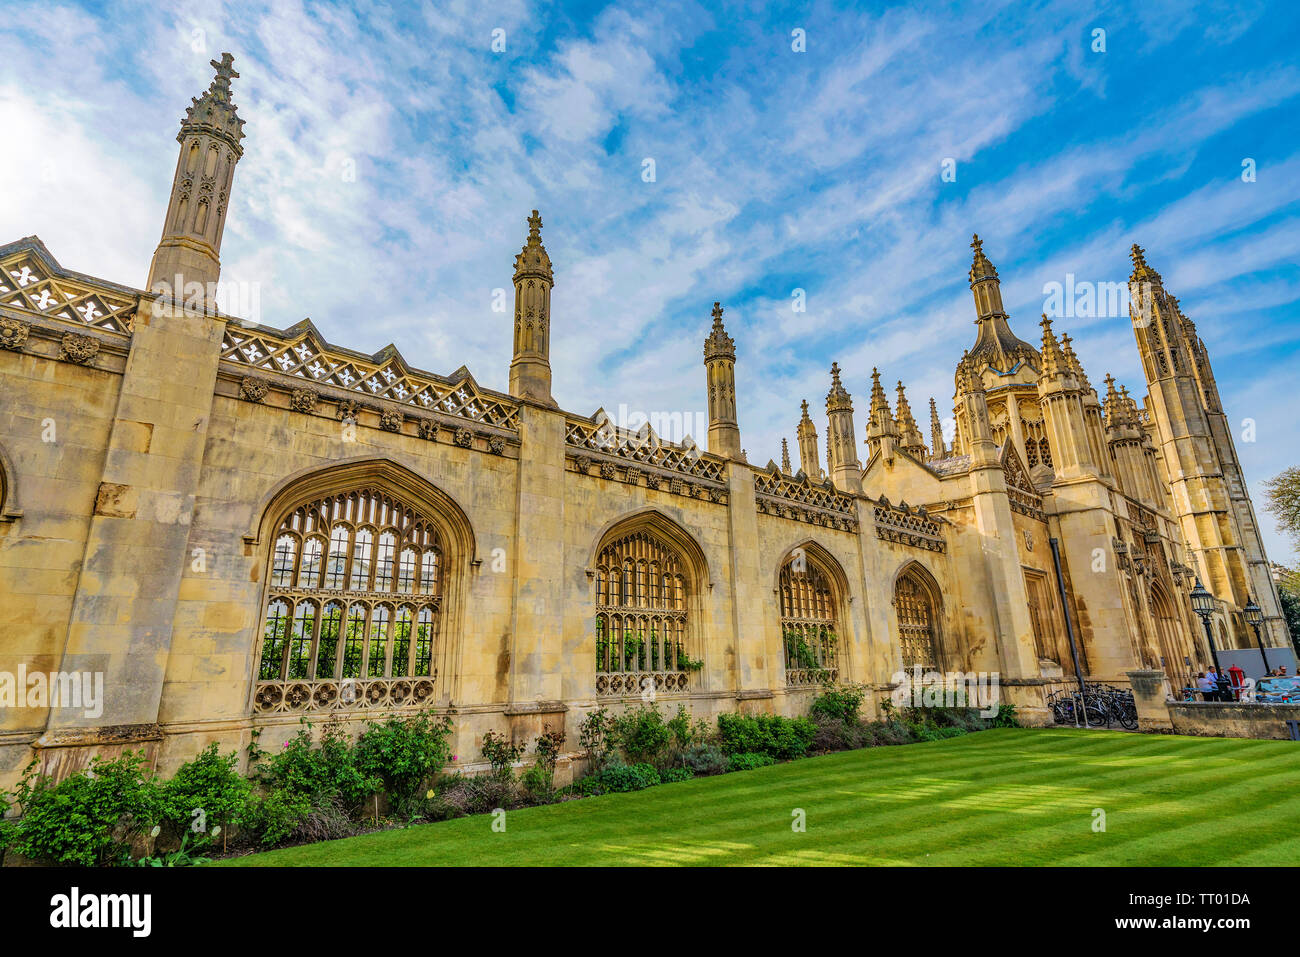 CAMBRIDGE, UNITED KINGDOM - APRIL 18: Historic architecture of the famous King's College buildings, a popular travel destination on April 18, 2019 in Stock Photo